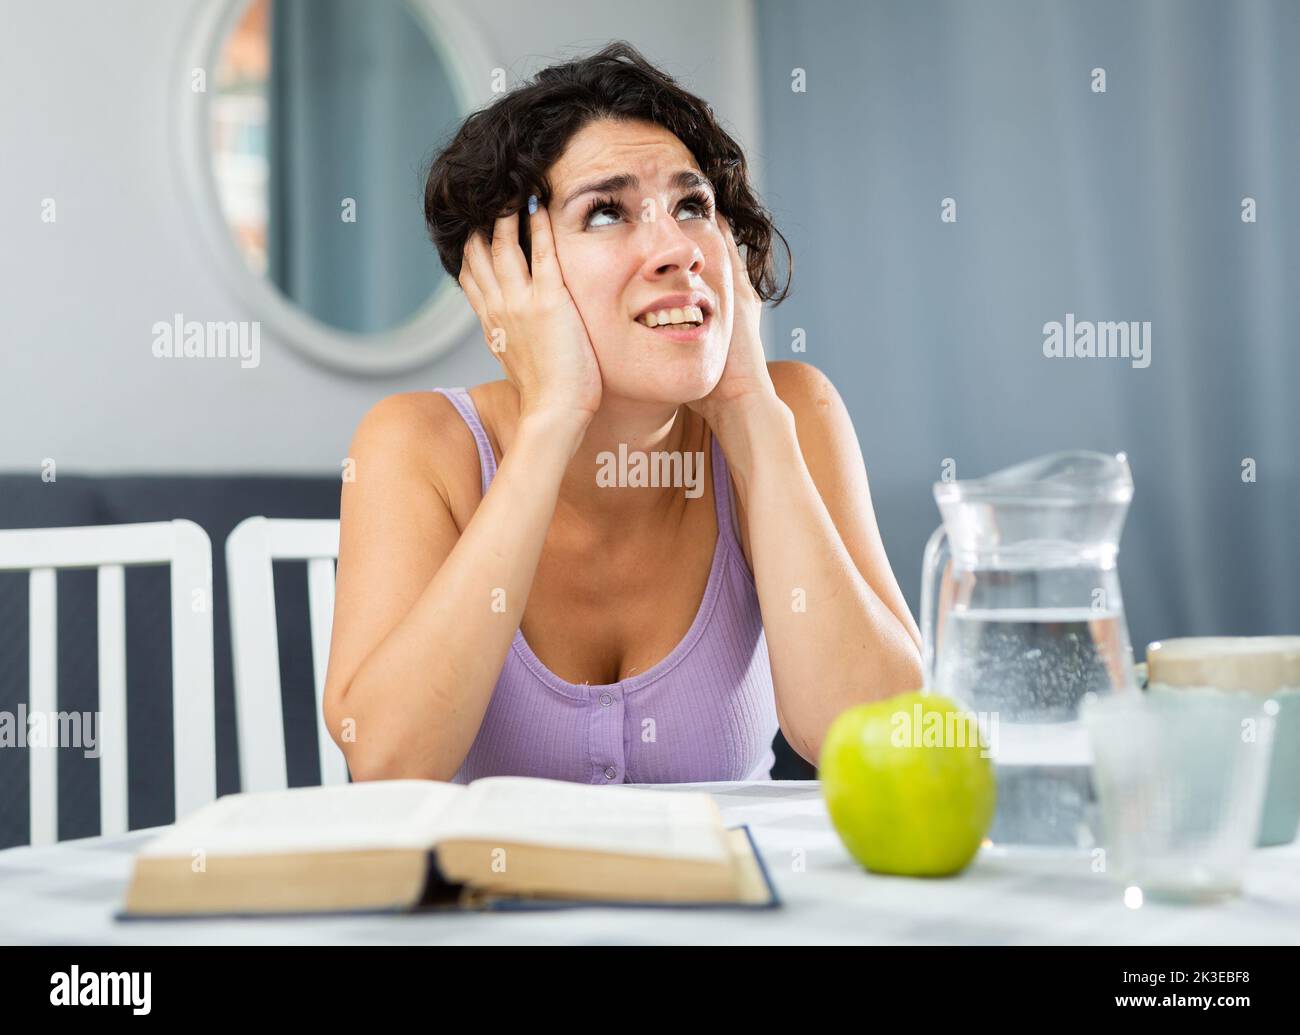 Woman is hysterical about not being able to learn her lessons for exams Stock Photo